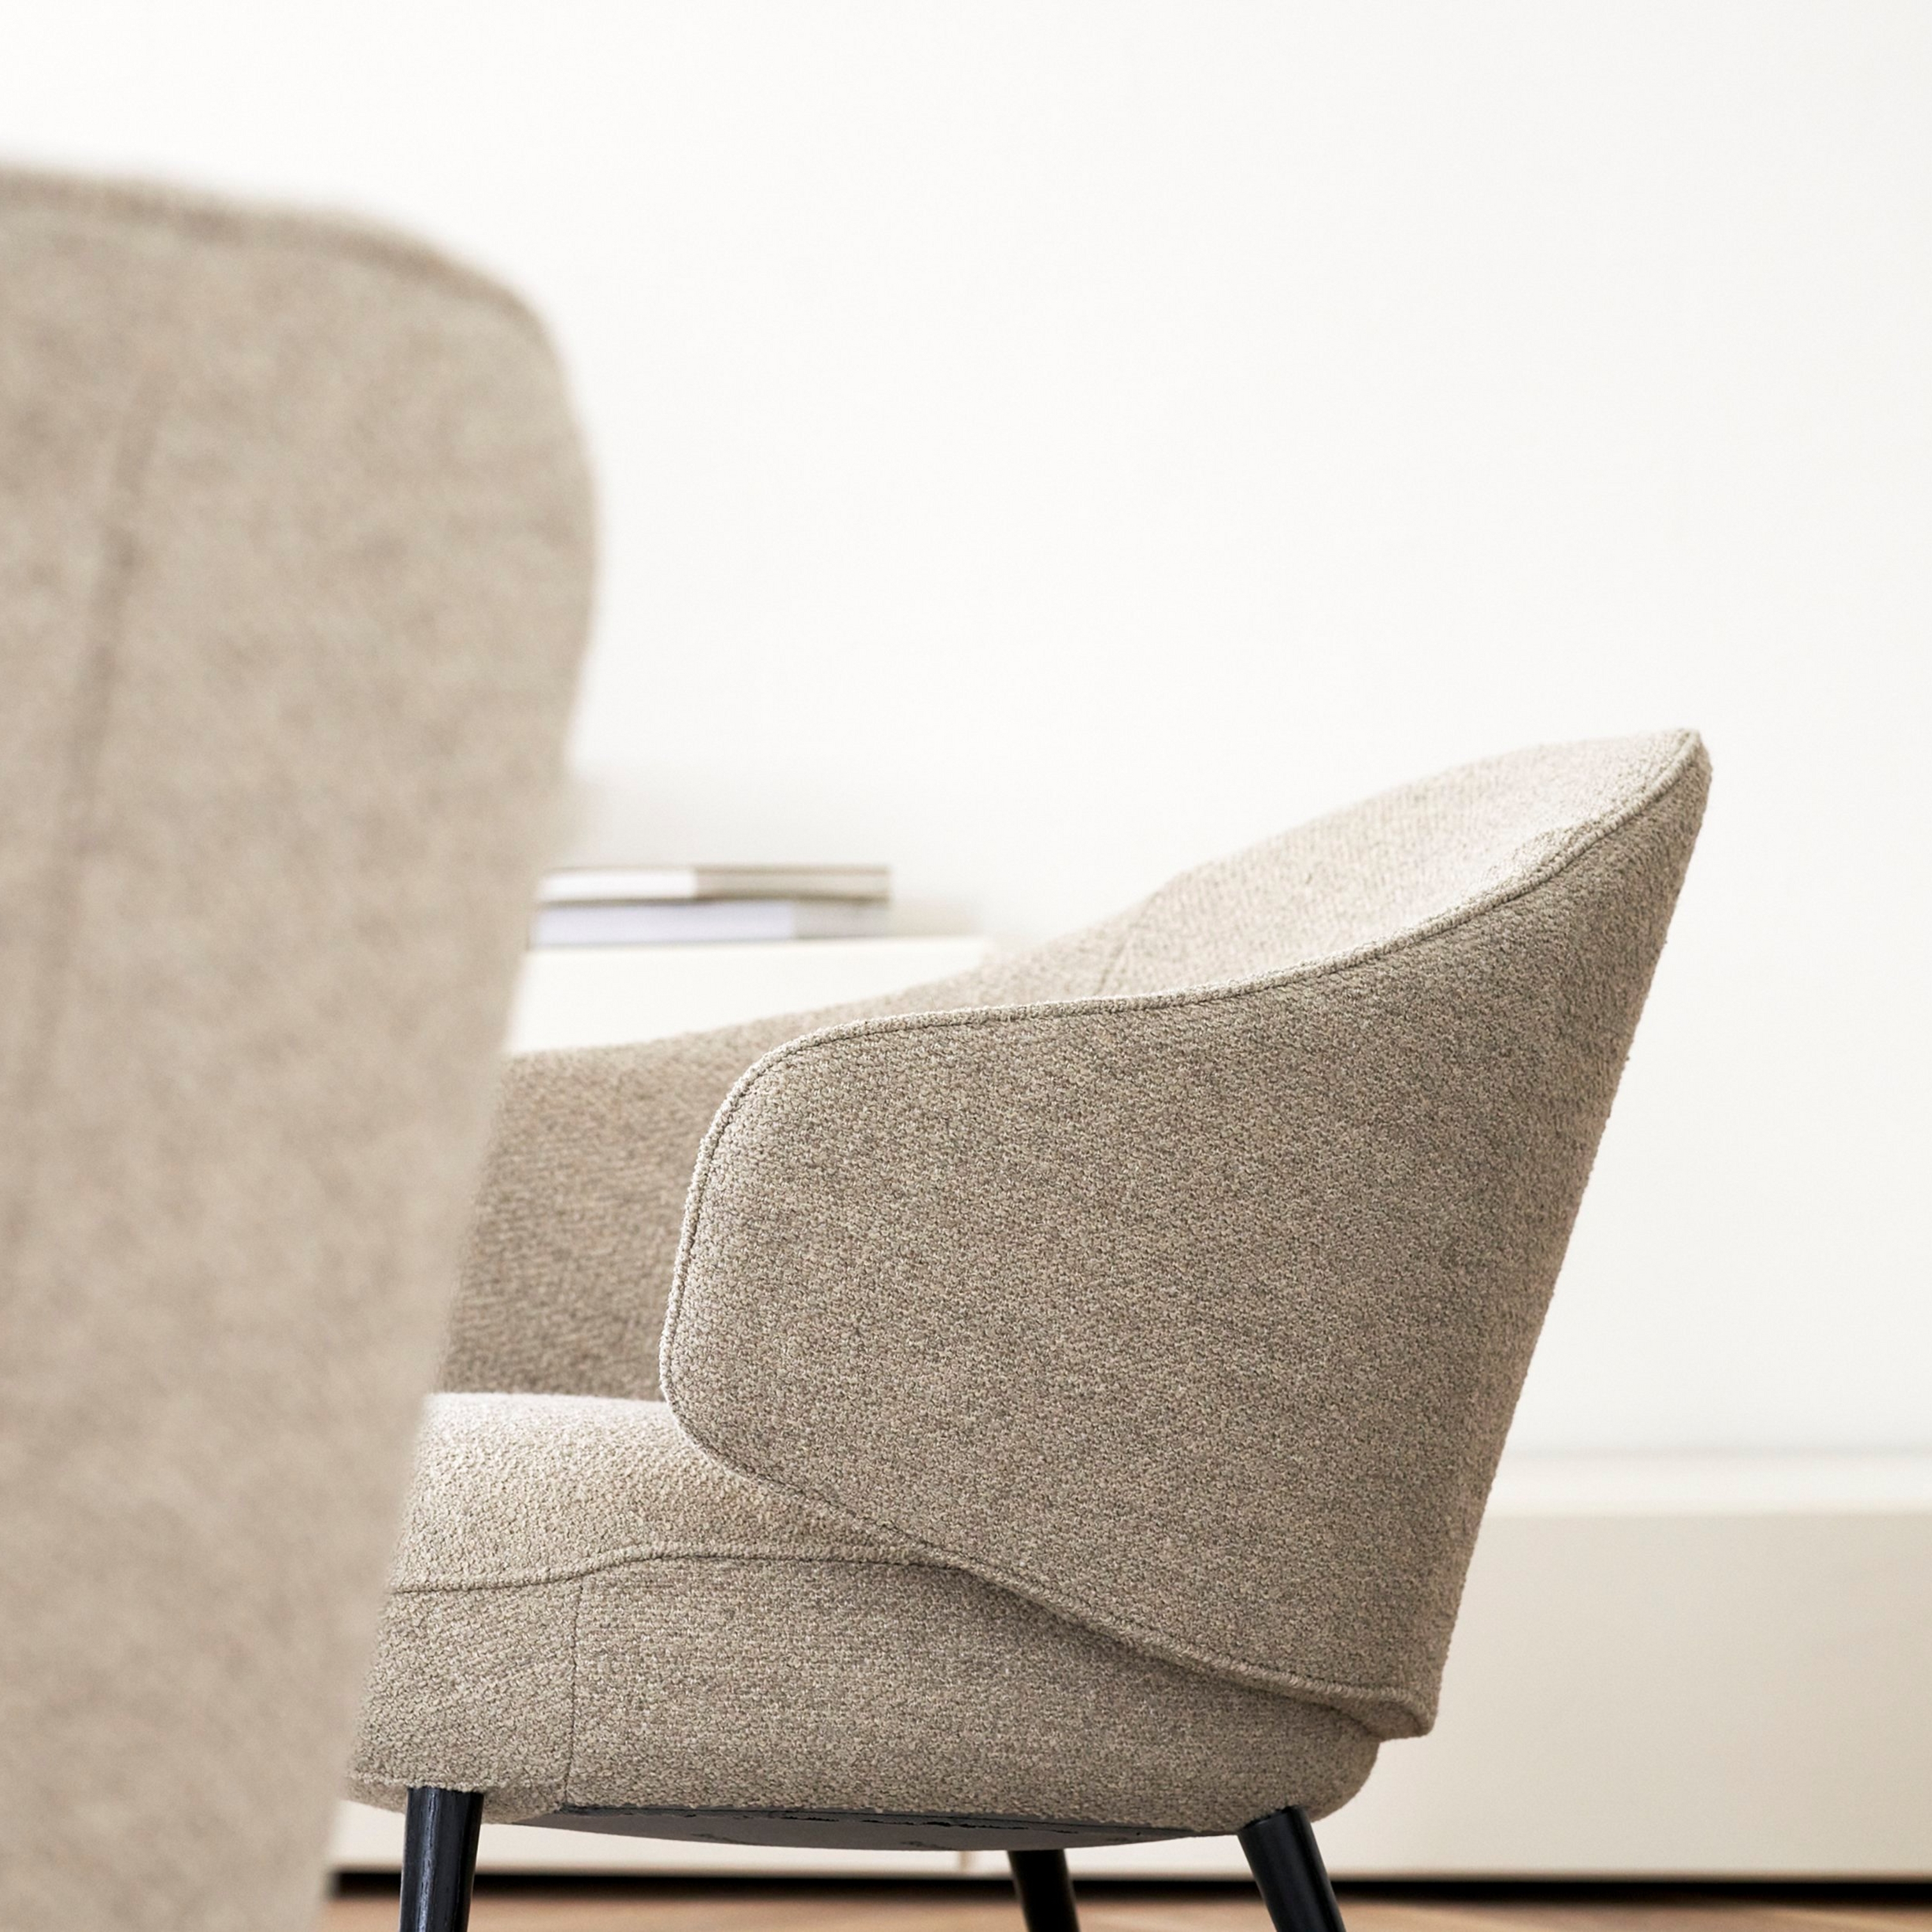 Side view of two textured fabric chairs with black legs in a light interior.